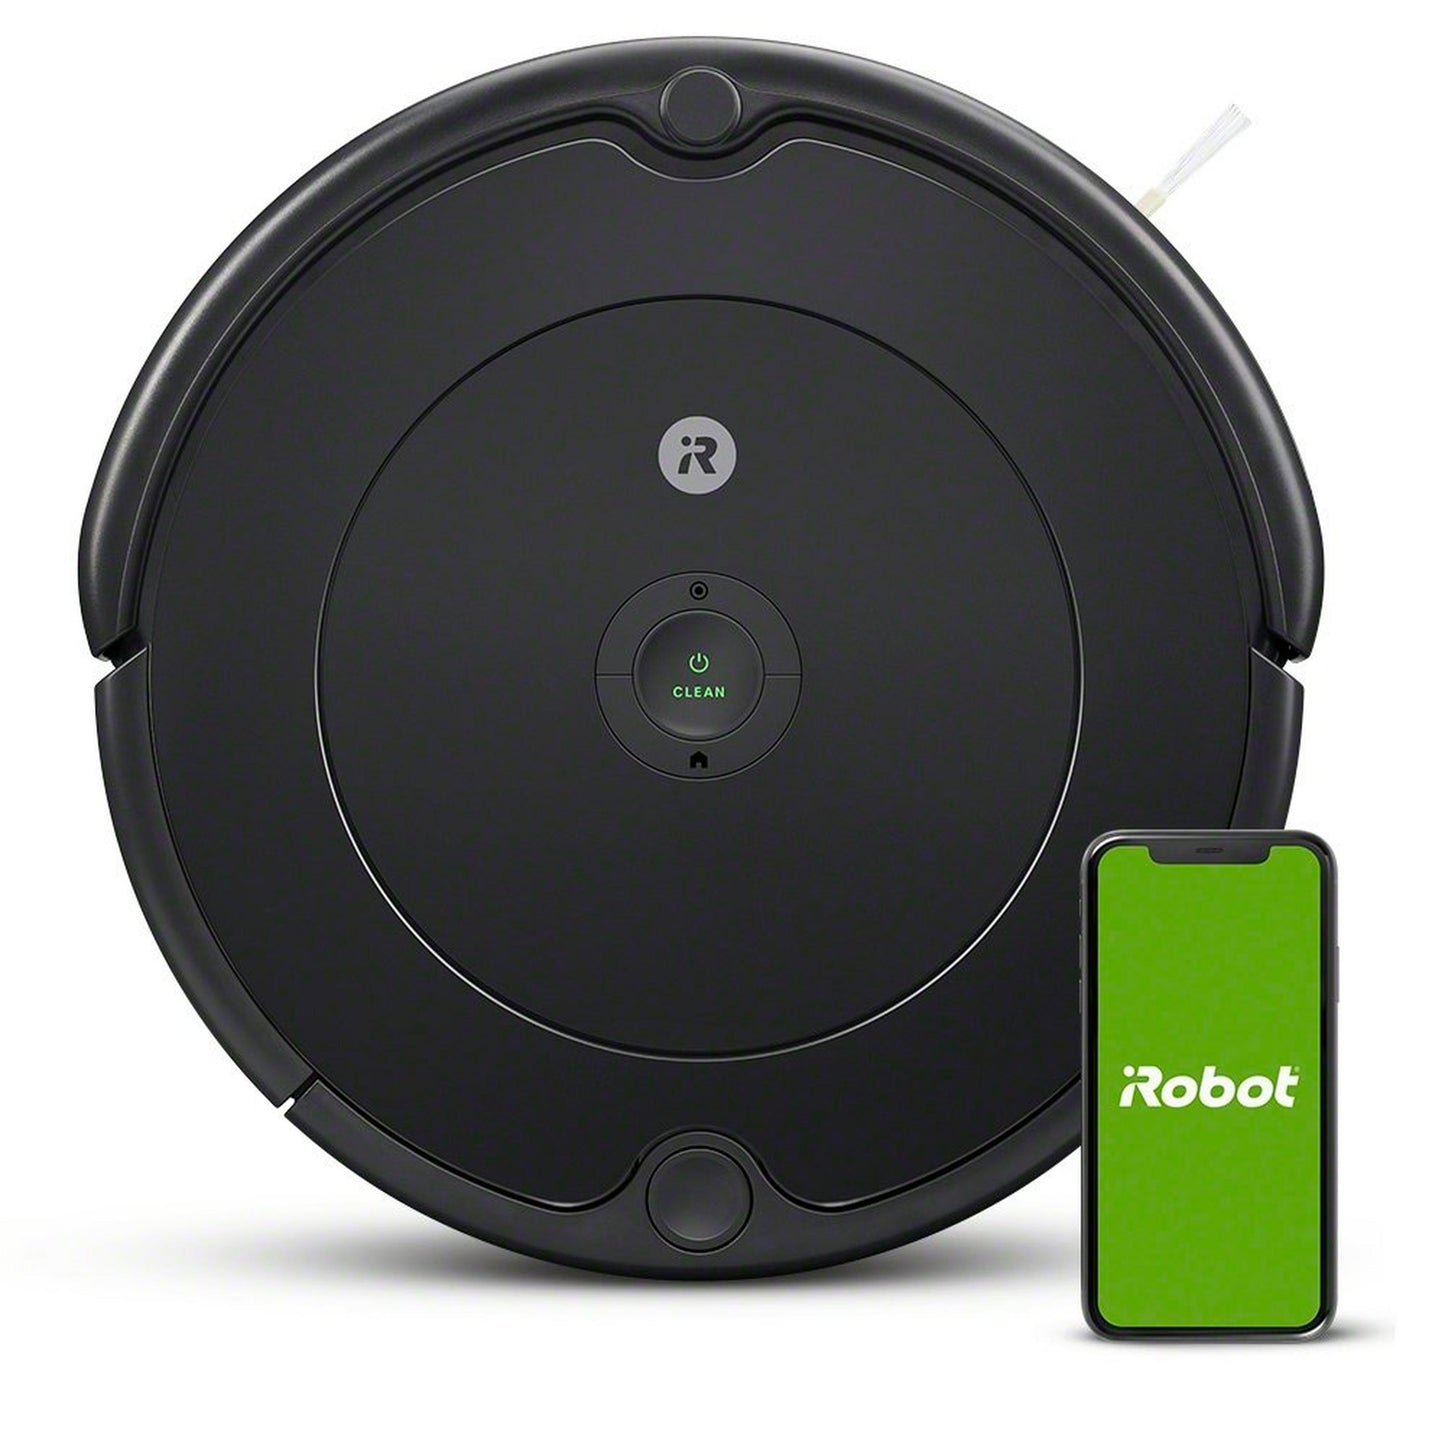 iRobot Roomba 694 Wi-Fi Robot Vacuum - Works with Google Home and Alexa